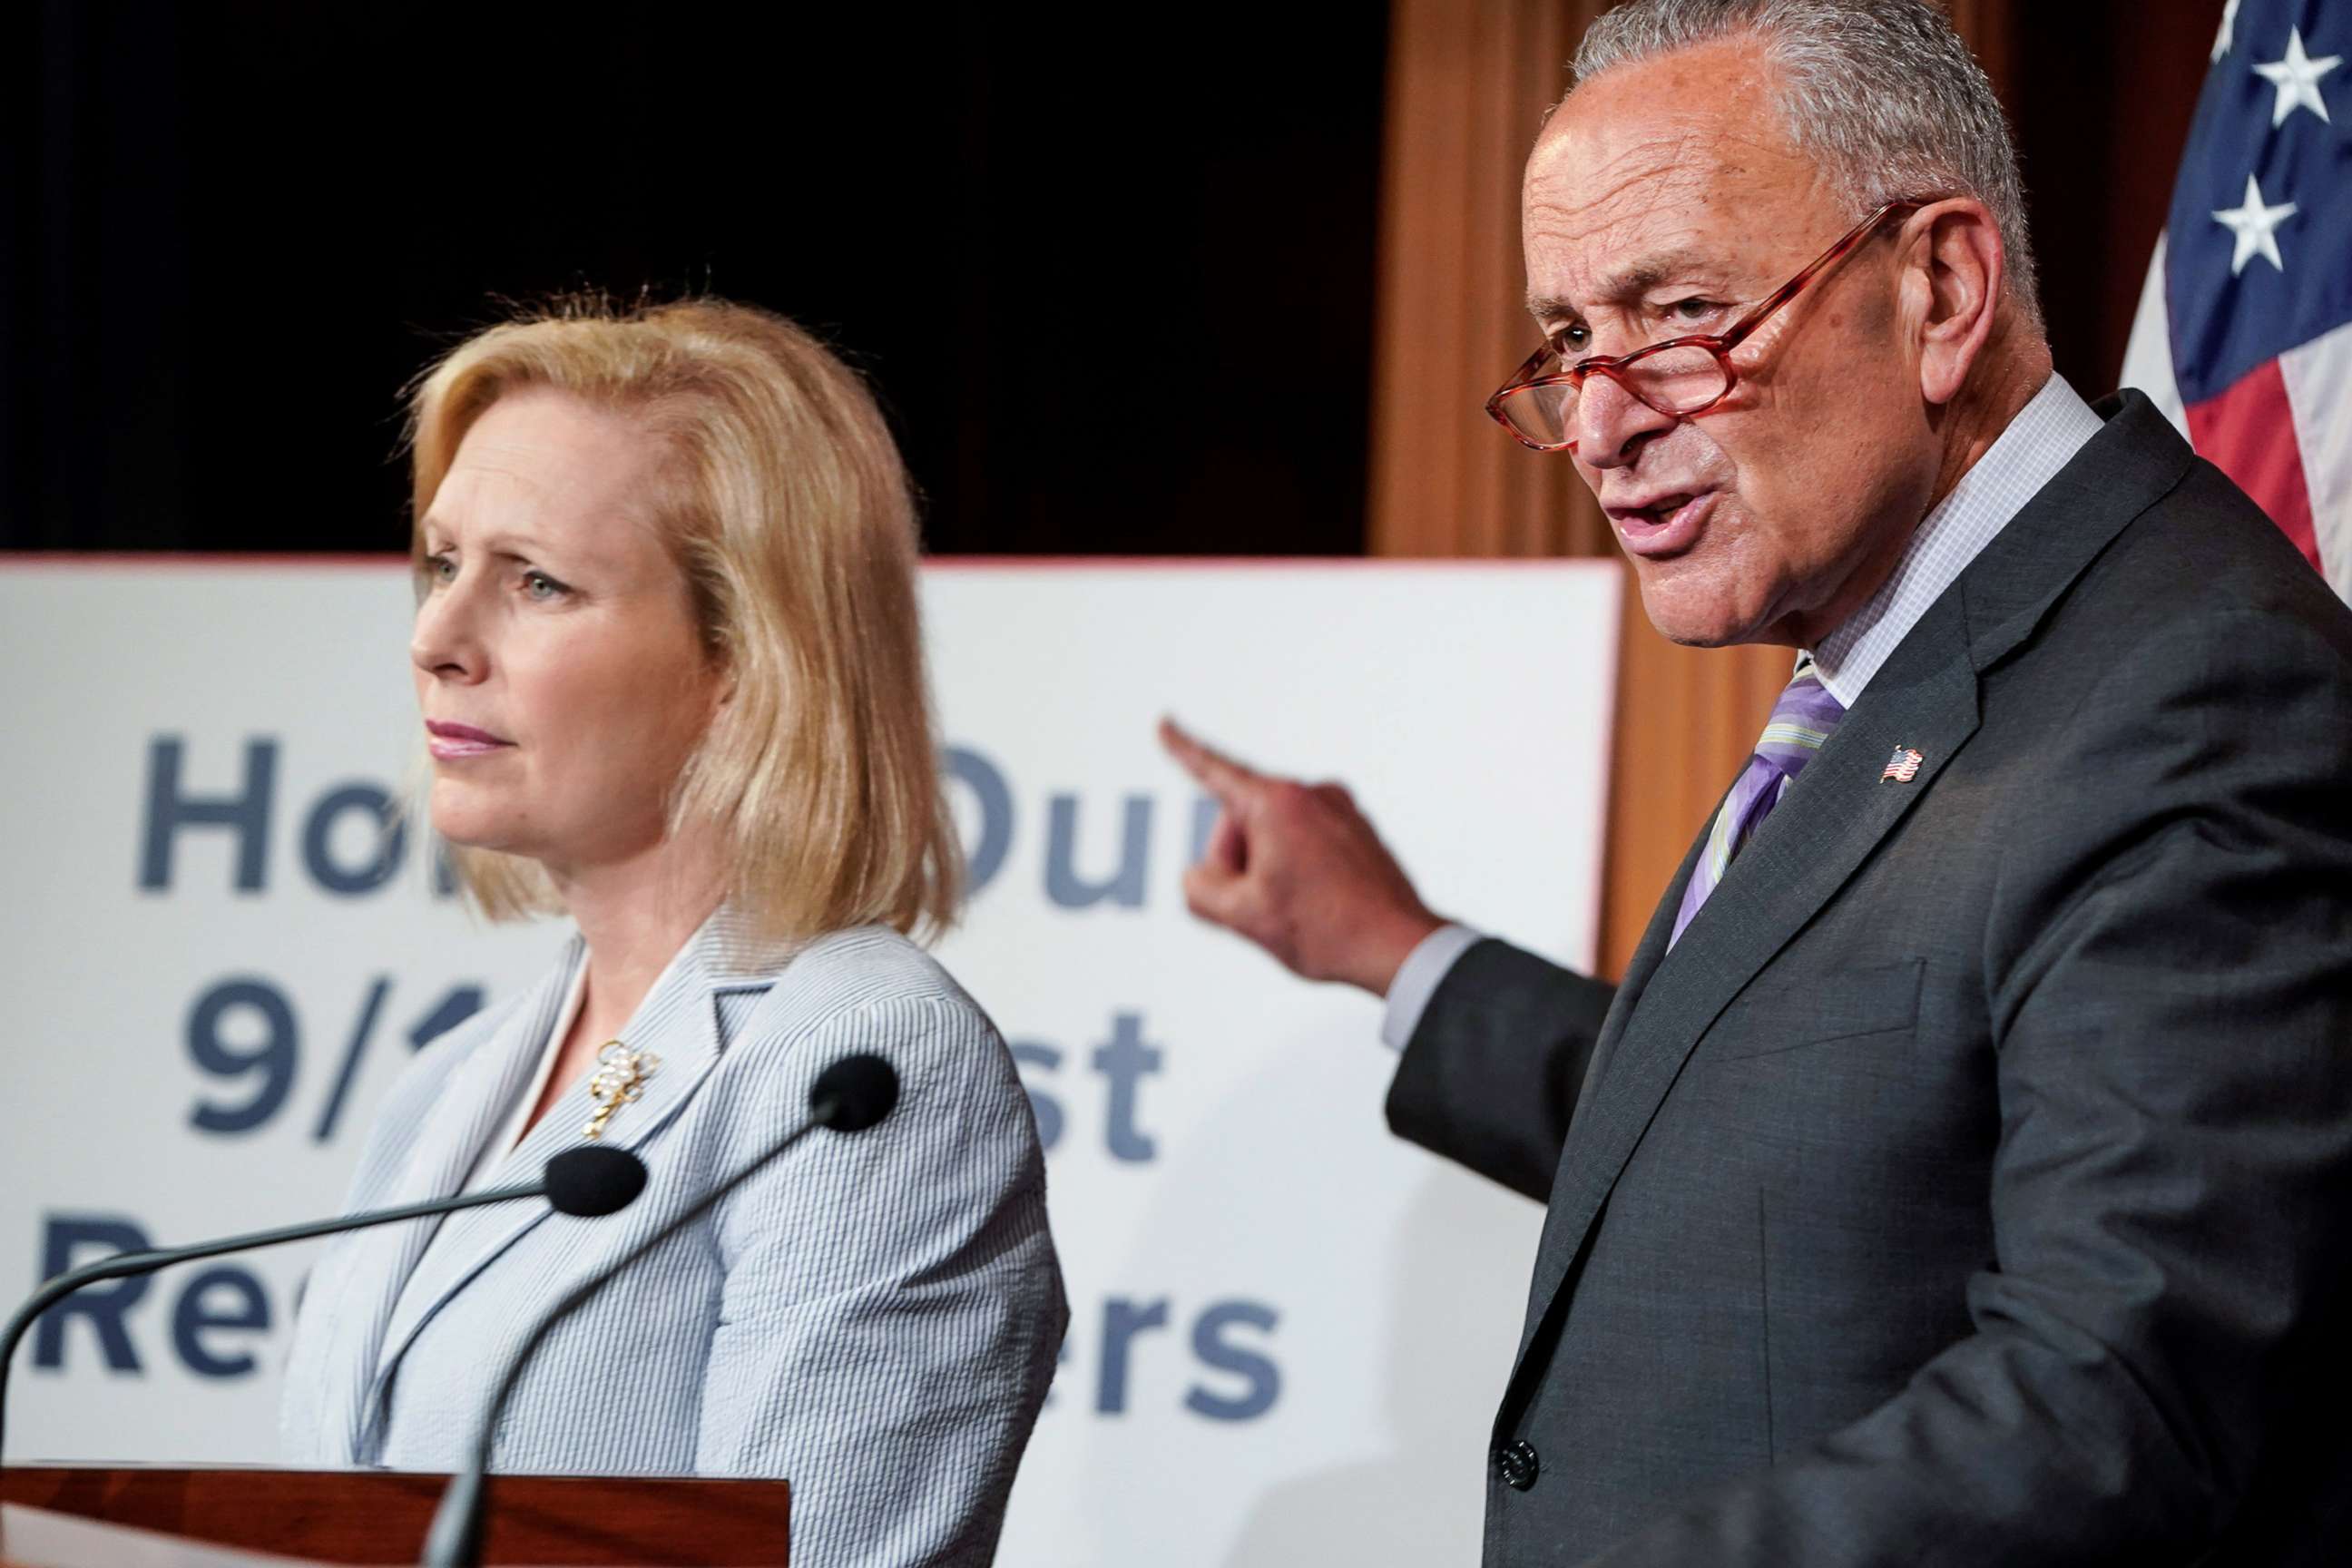 PHOTO: Senators Kirsten Gillibrand and Senate Minority Leader Chuck Schumer call for a vote for a fund for September 11 first responders during media briefing on Capitol Hill in Washington, D.C., July 17, 2019.